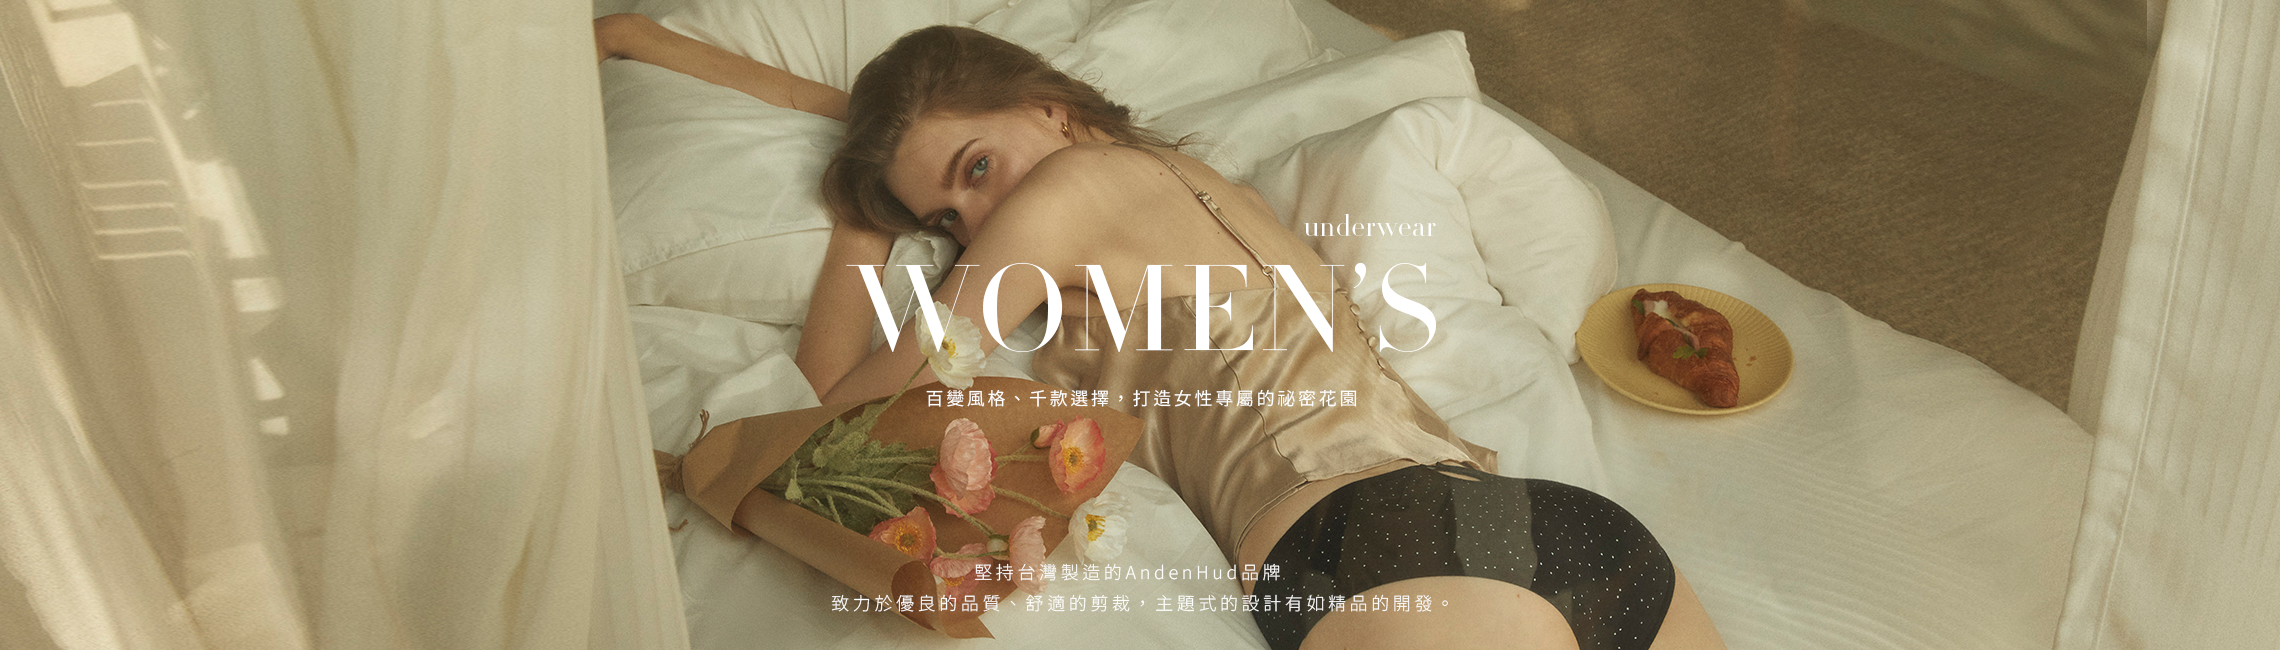 Women Underwear - Most Recommended Brand